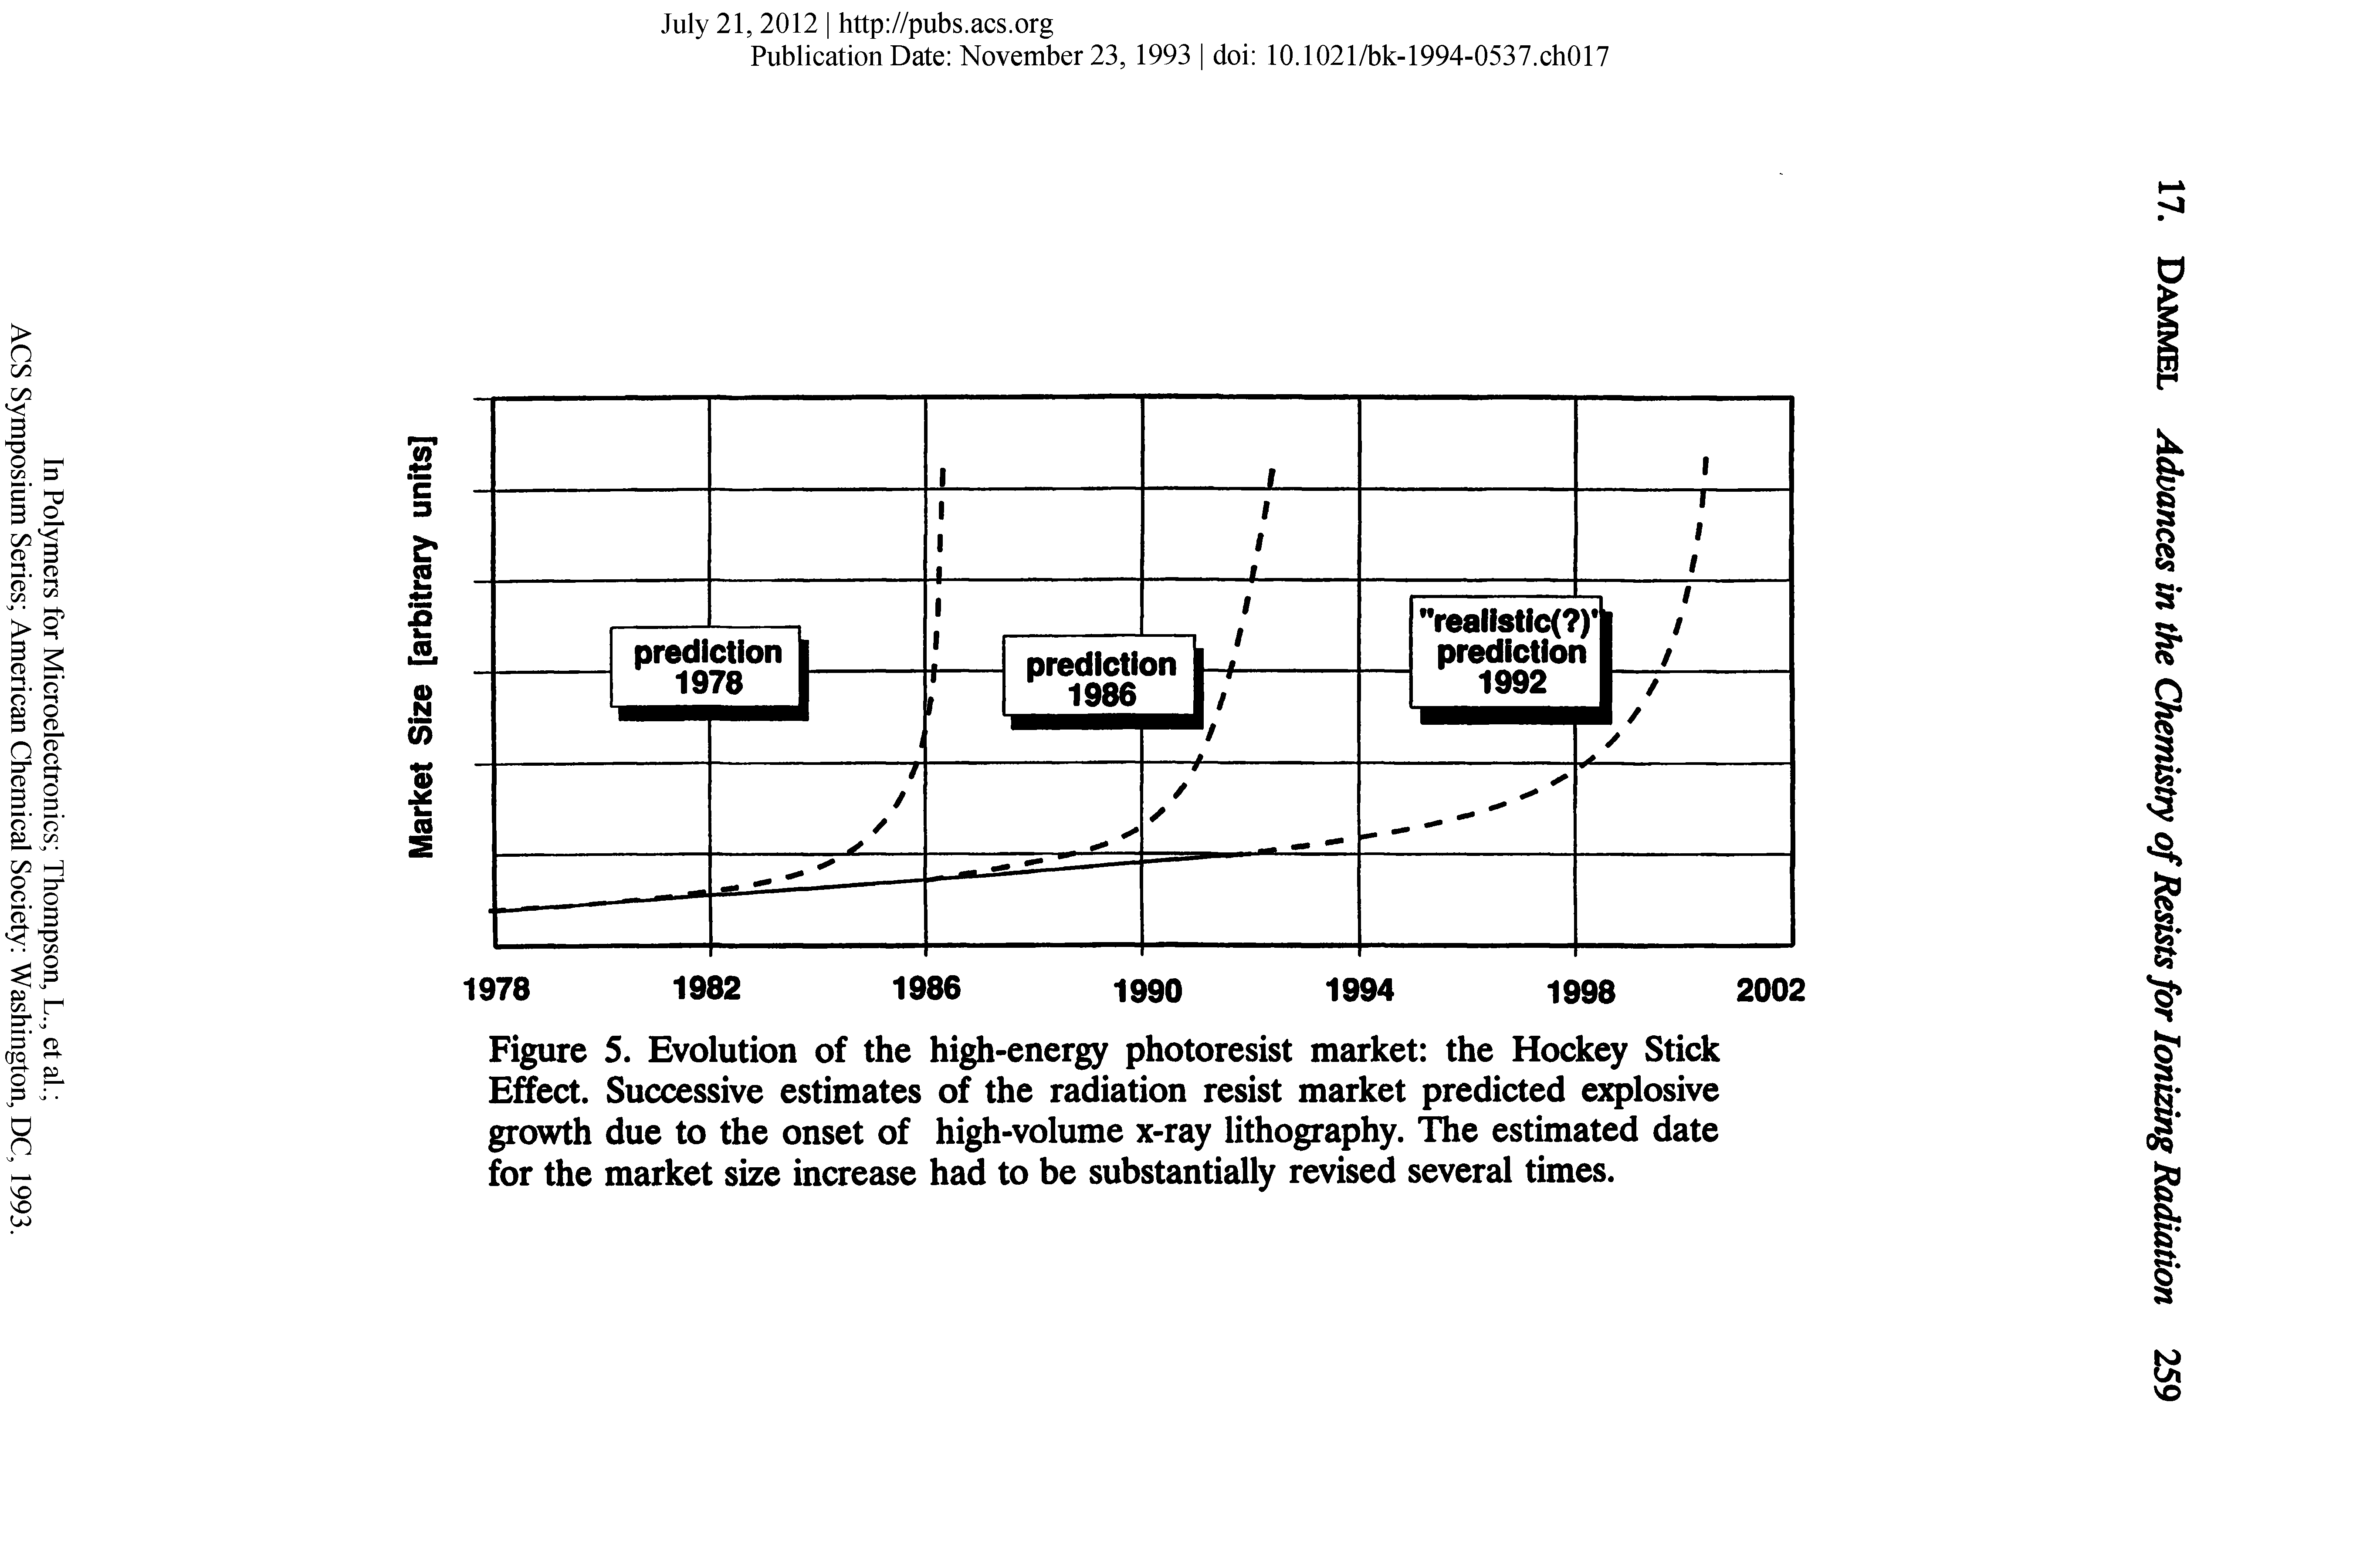 Figure 5. Evolution of the high-energy photoresist market the Hockey Stick Effect. Successive estimates of the radiation resist market predicted explosive growth due to the onset of high-volume x-ray lithography. The estimated date for the market size increase had to be substantially revised several times.